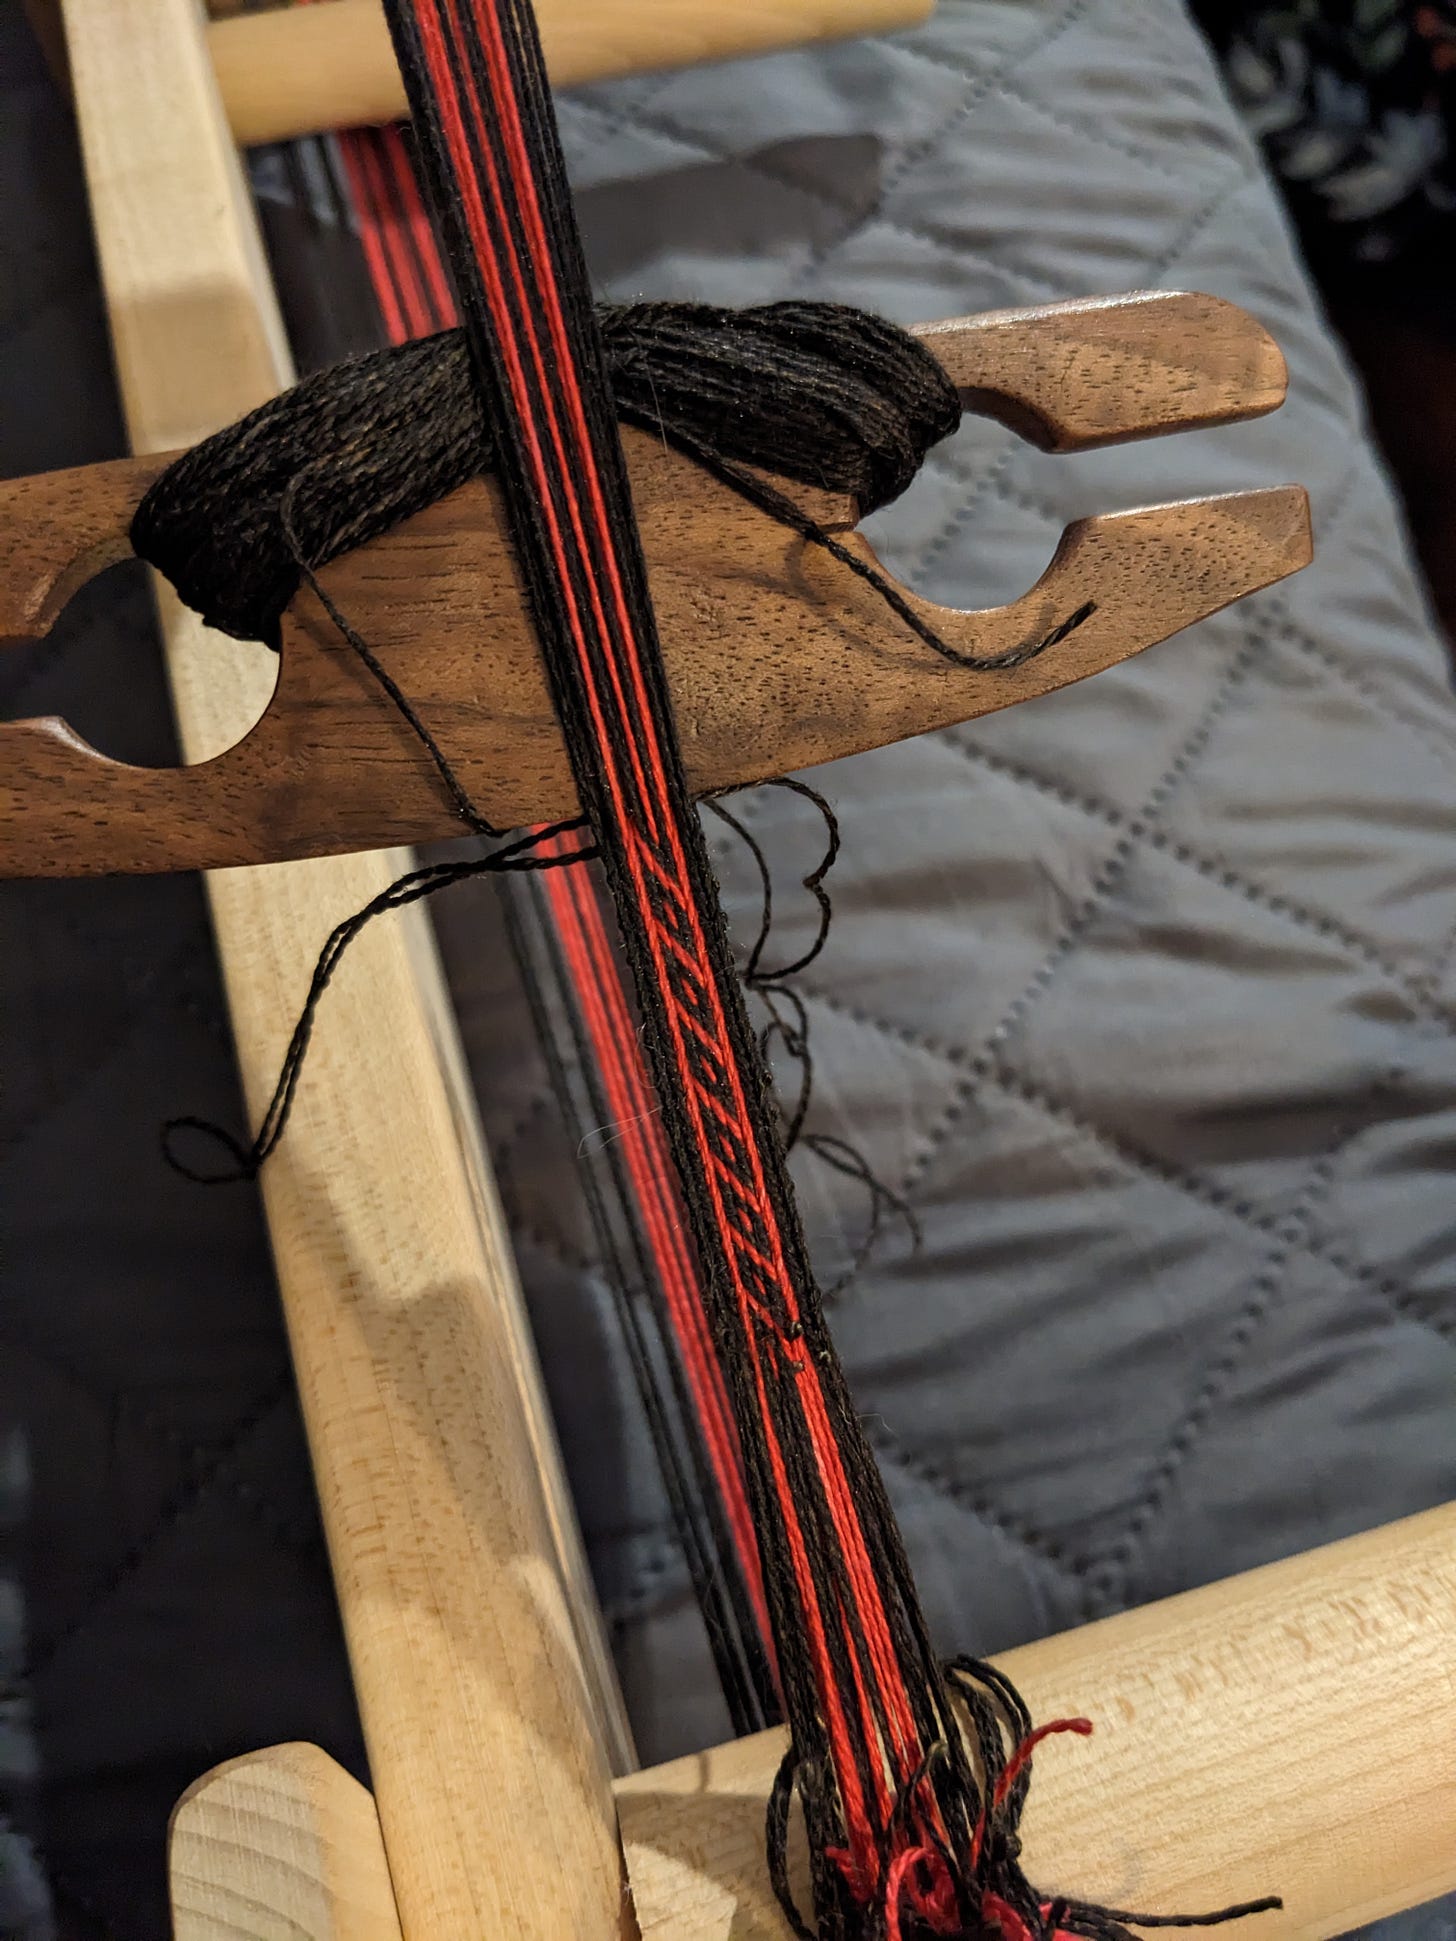 An inkle loom set up for card weaving with a pattern of black and red silk.